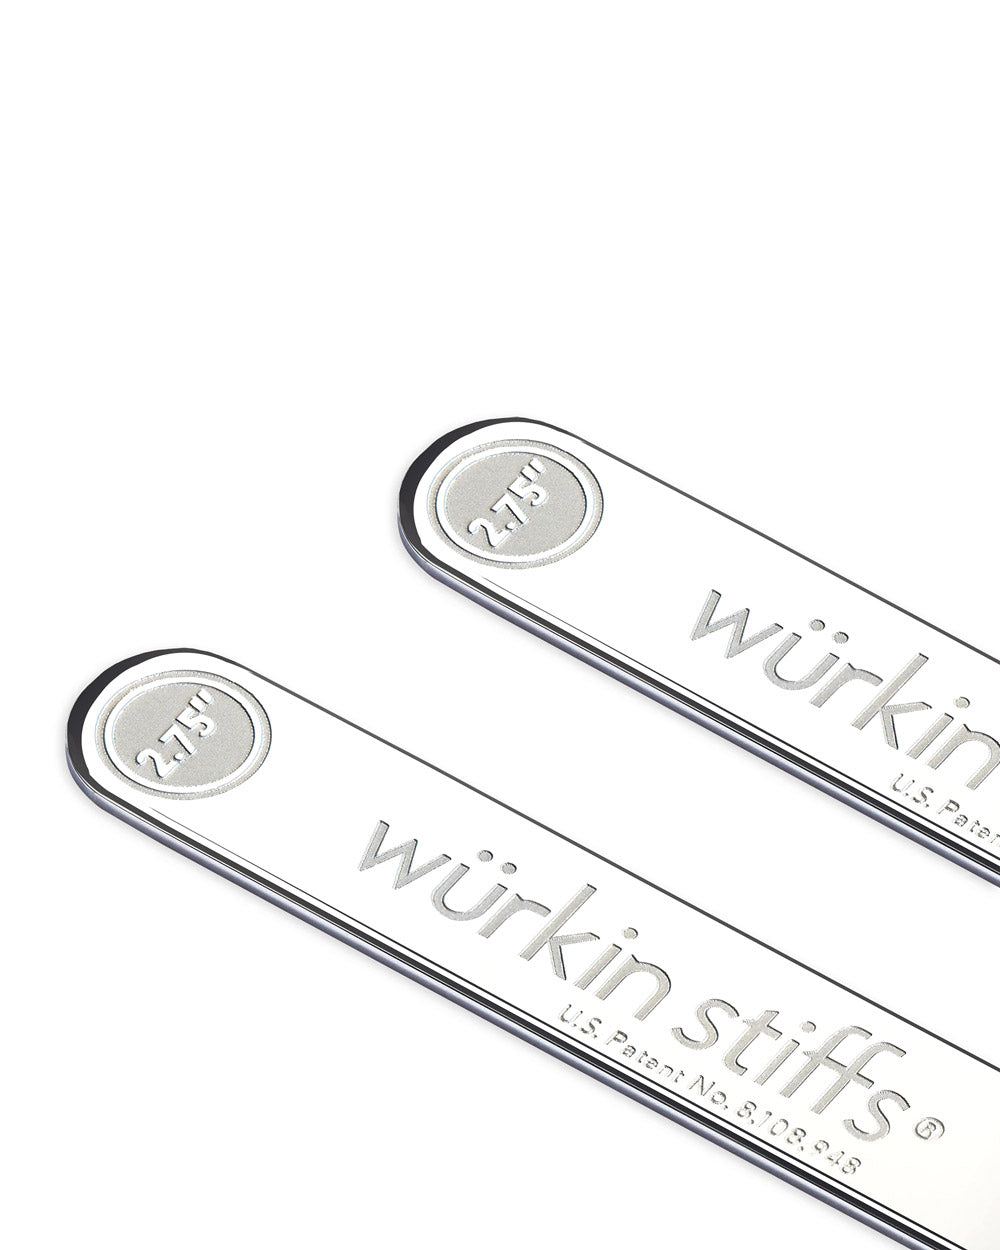 2.75 Magnetic Power Collar Stays